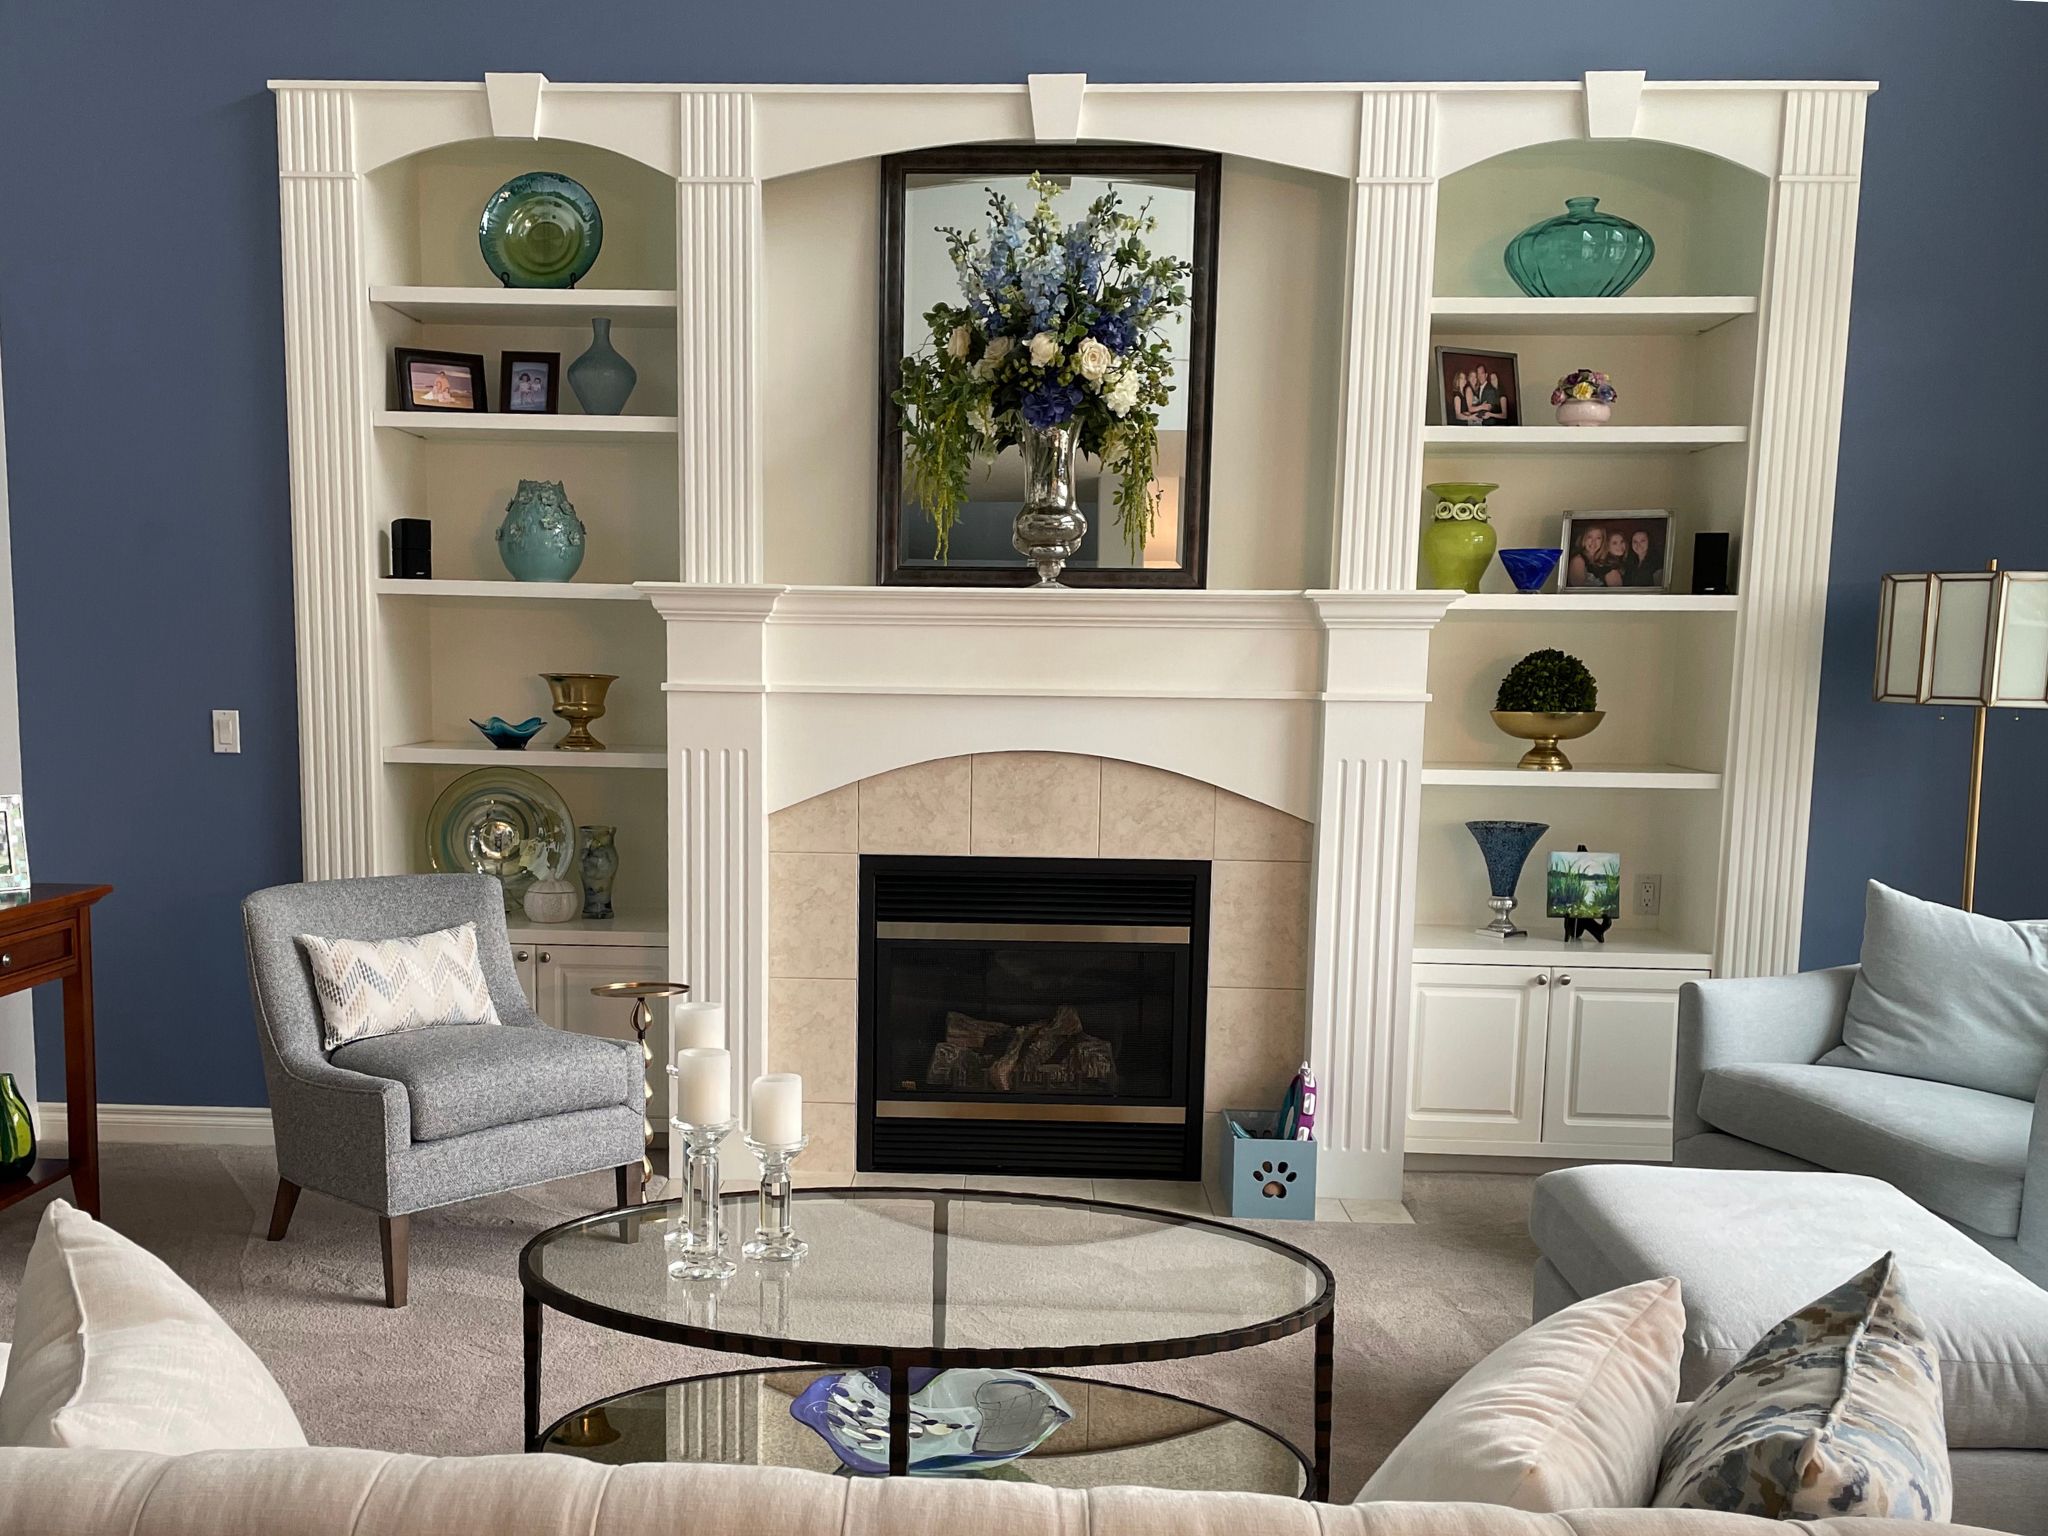 Large cream fireplace and built in shelving